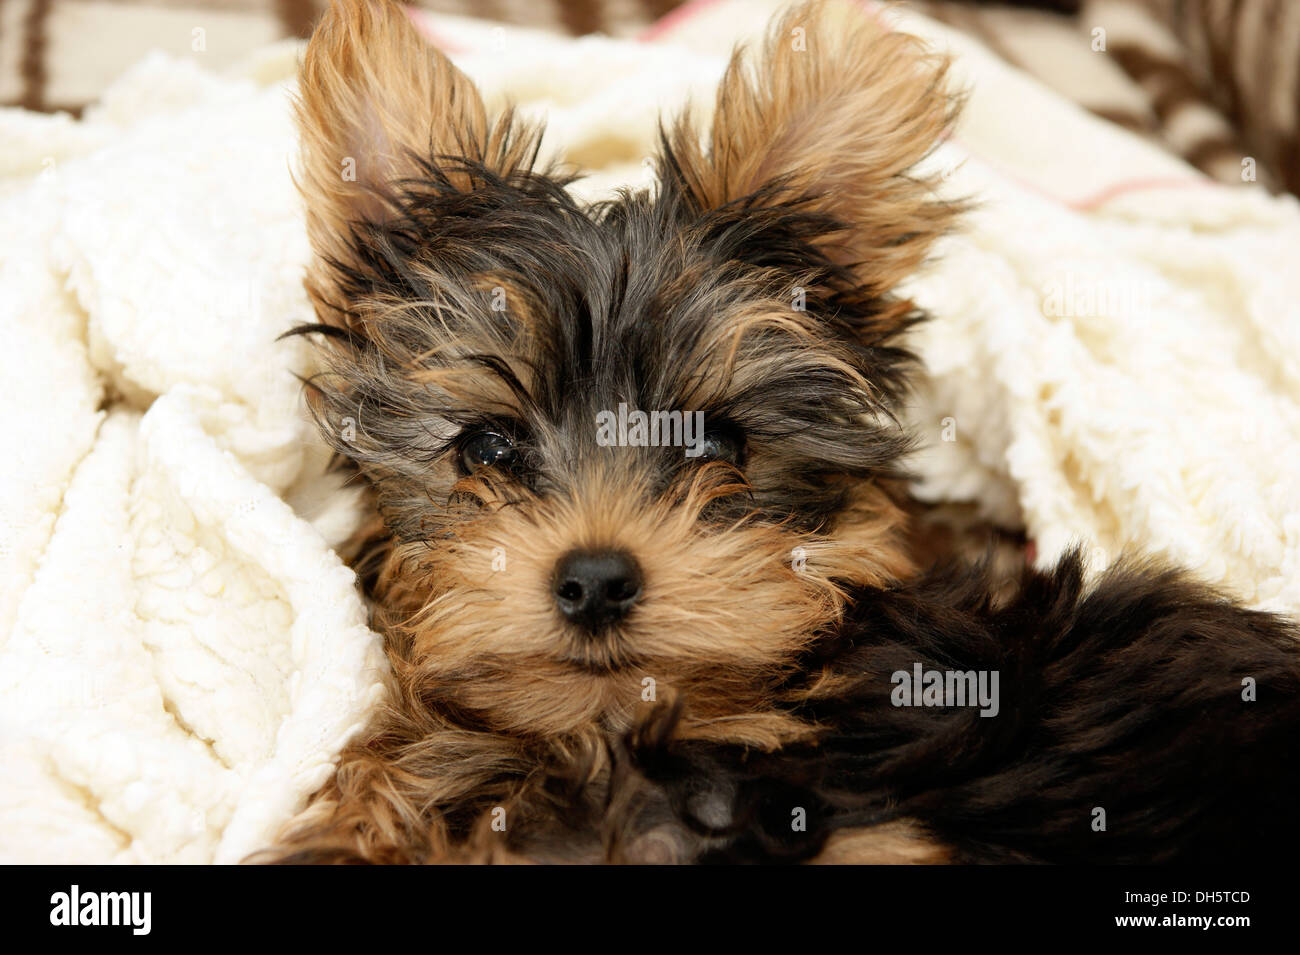 Cute Yorkshire Terrier Puppy Dog DH5TCD 